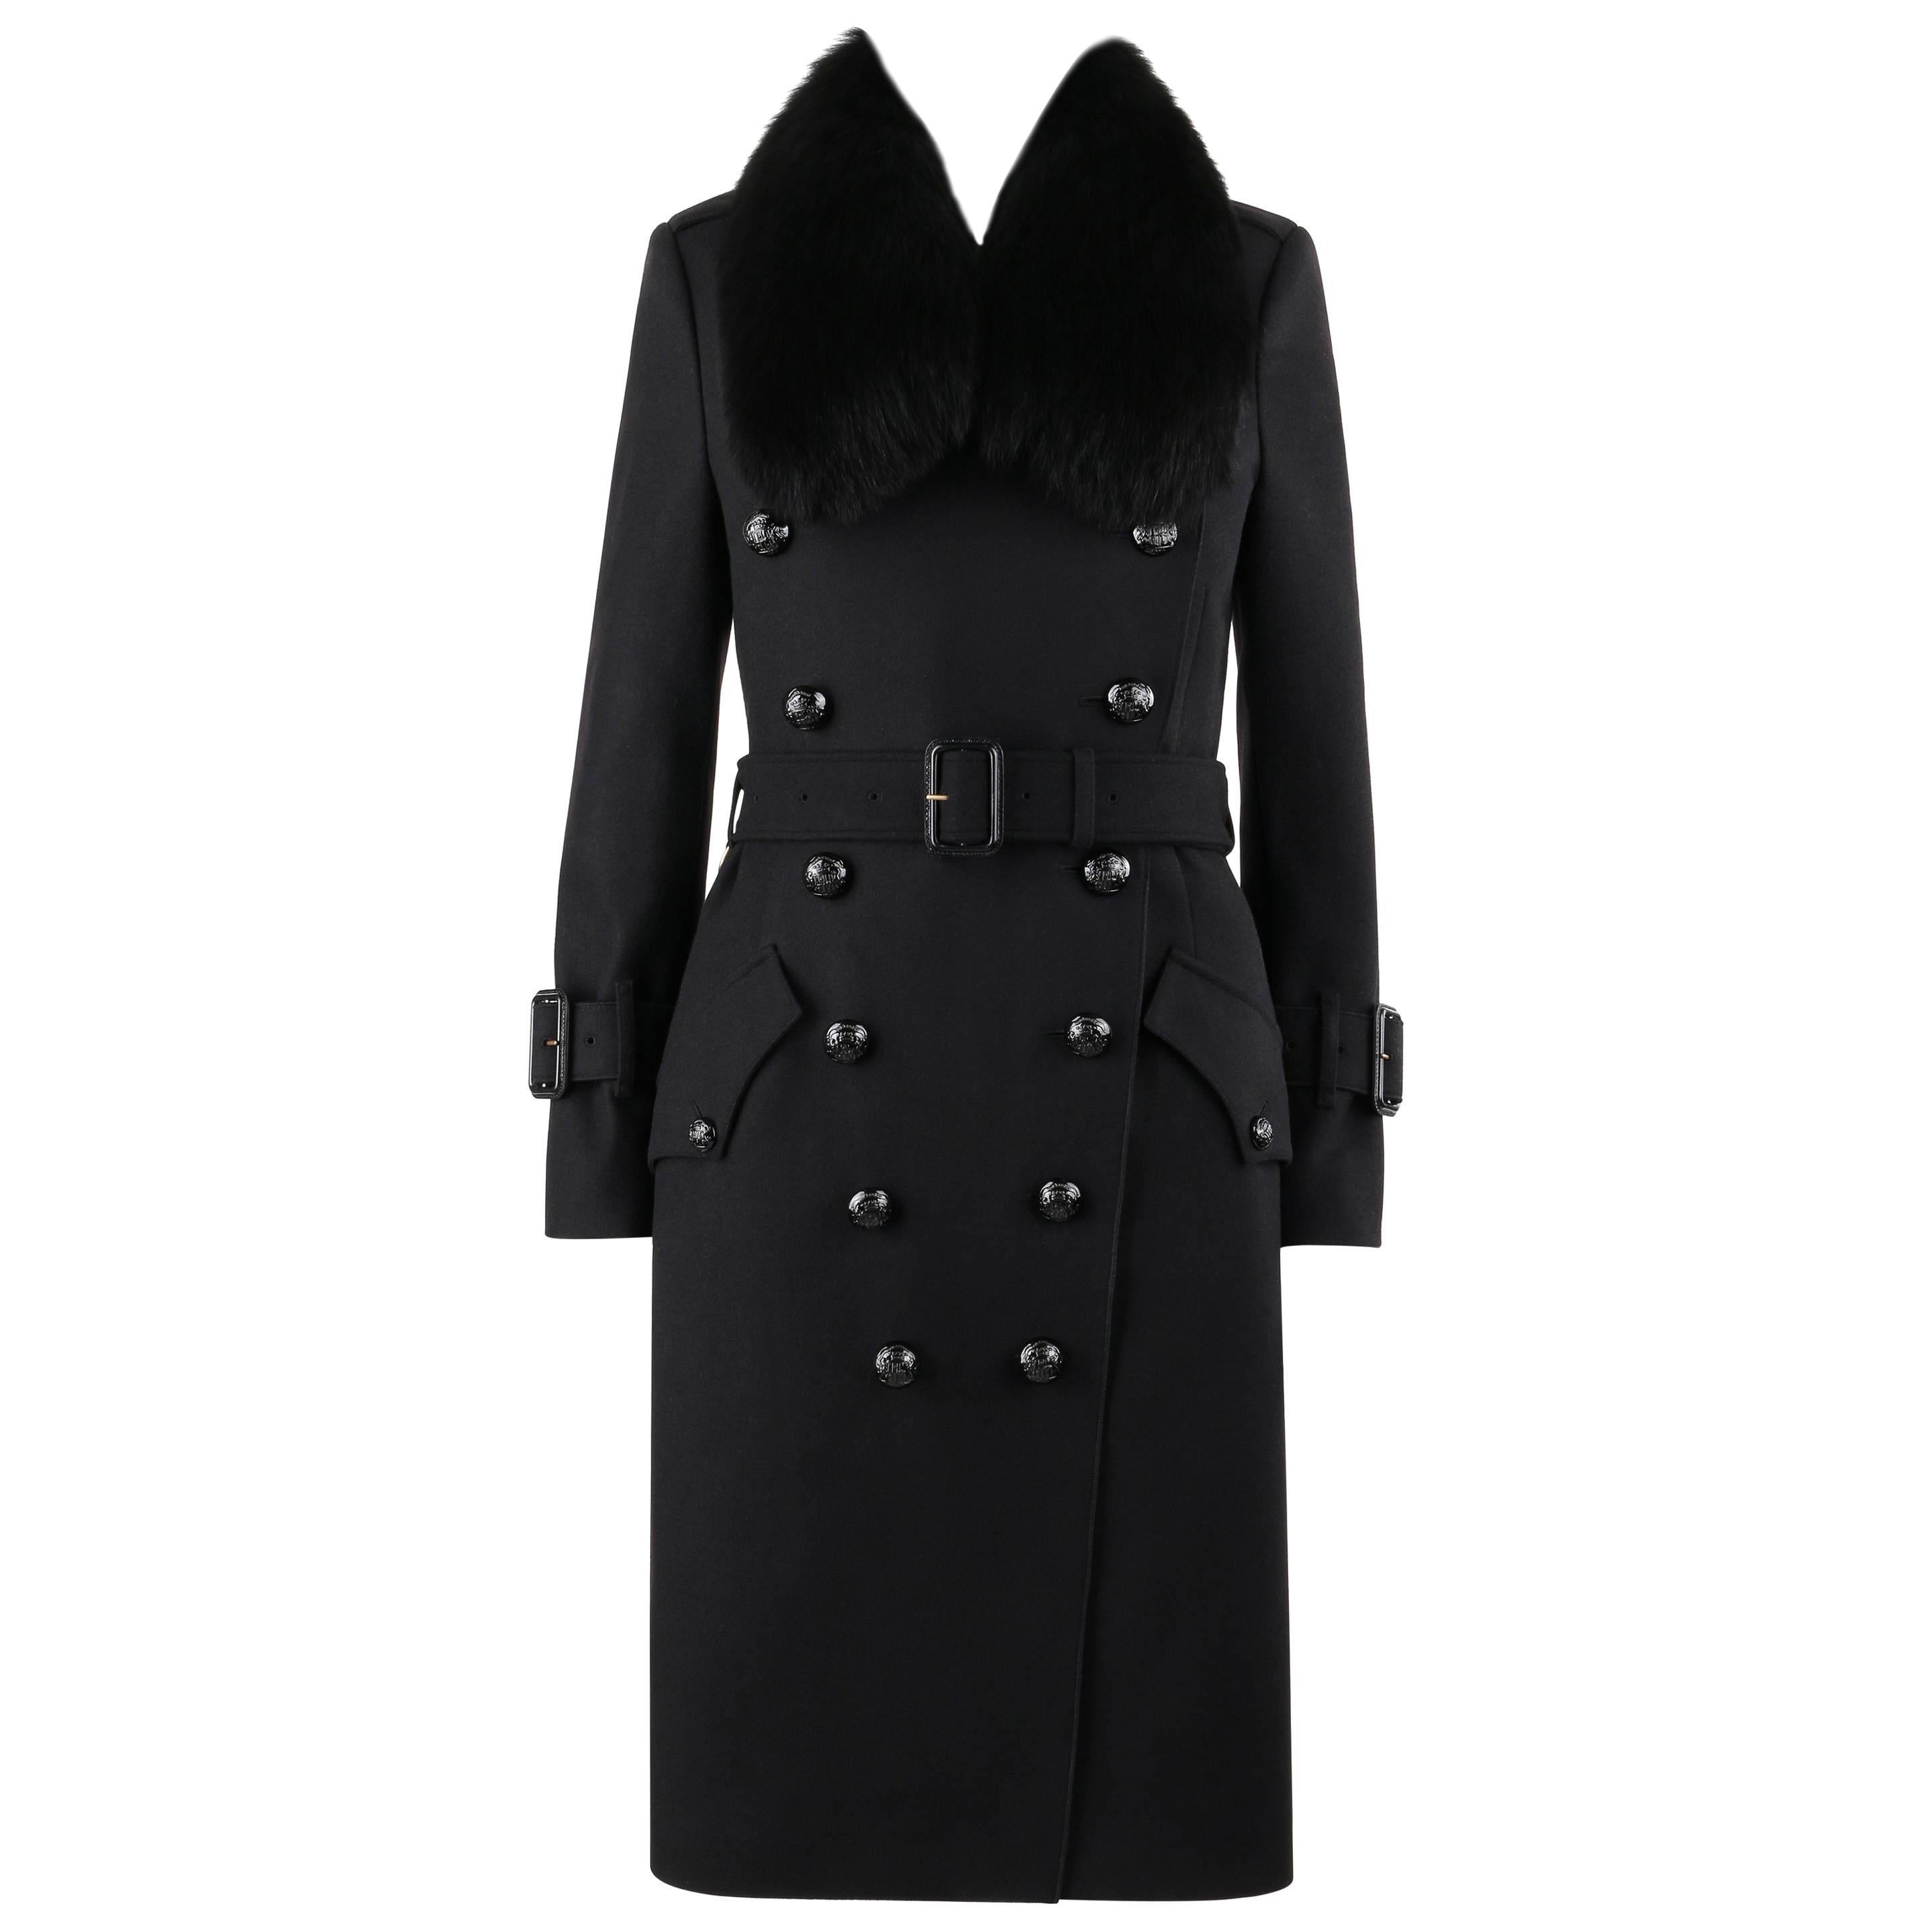 BURBERRY "Walgrave" Black Fox Fur Collar Double Breasted Belted Peacoat Trench